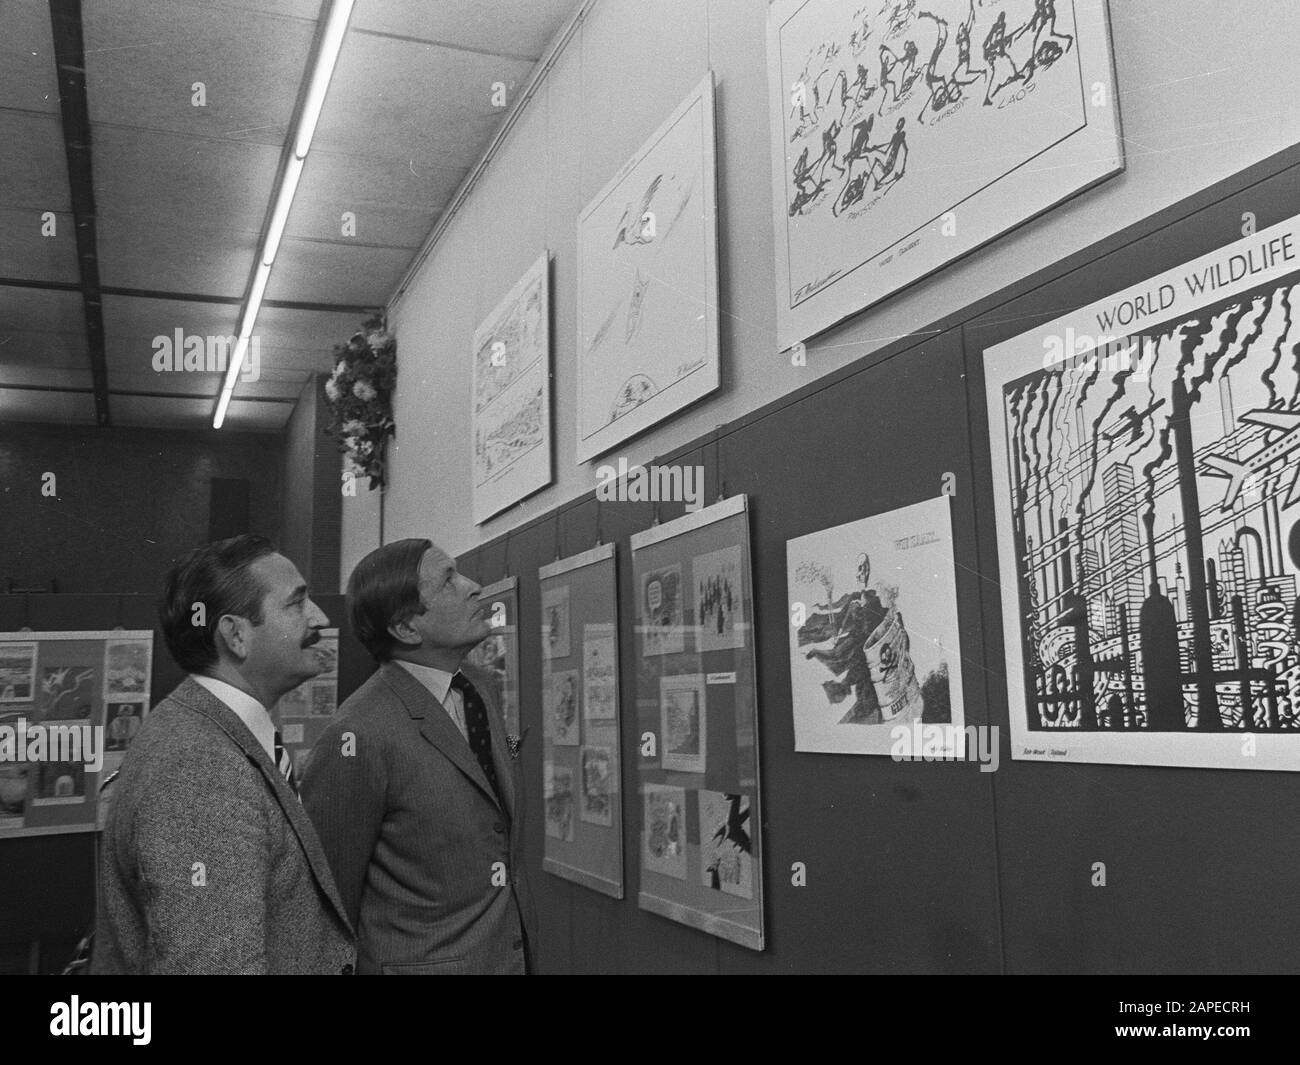 an cartoons in the building of the Parool. The prince and cartoonist Fritz Behrendt watch cartoons Date 9 November 1973; Stock Photo